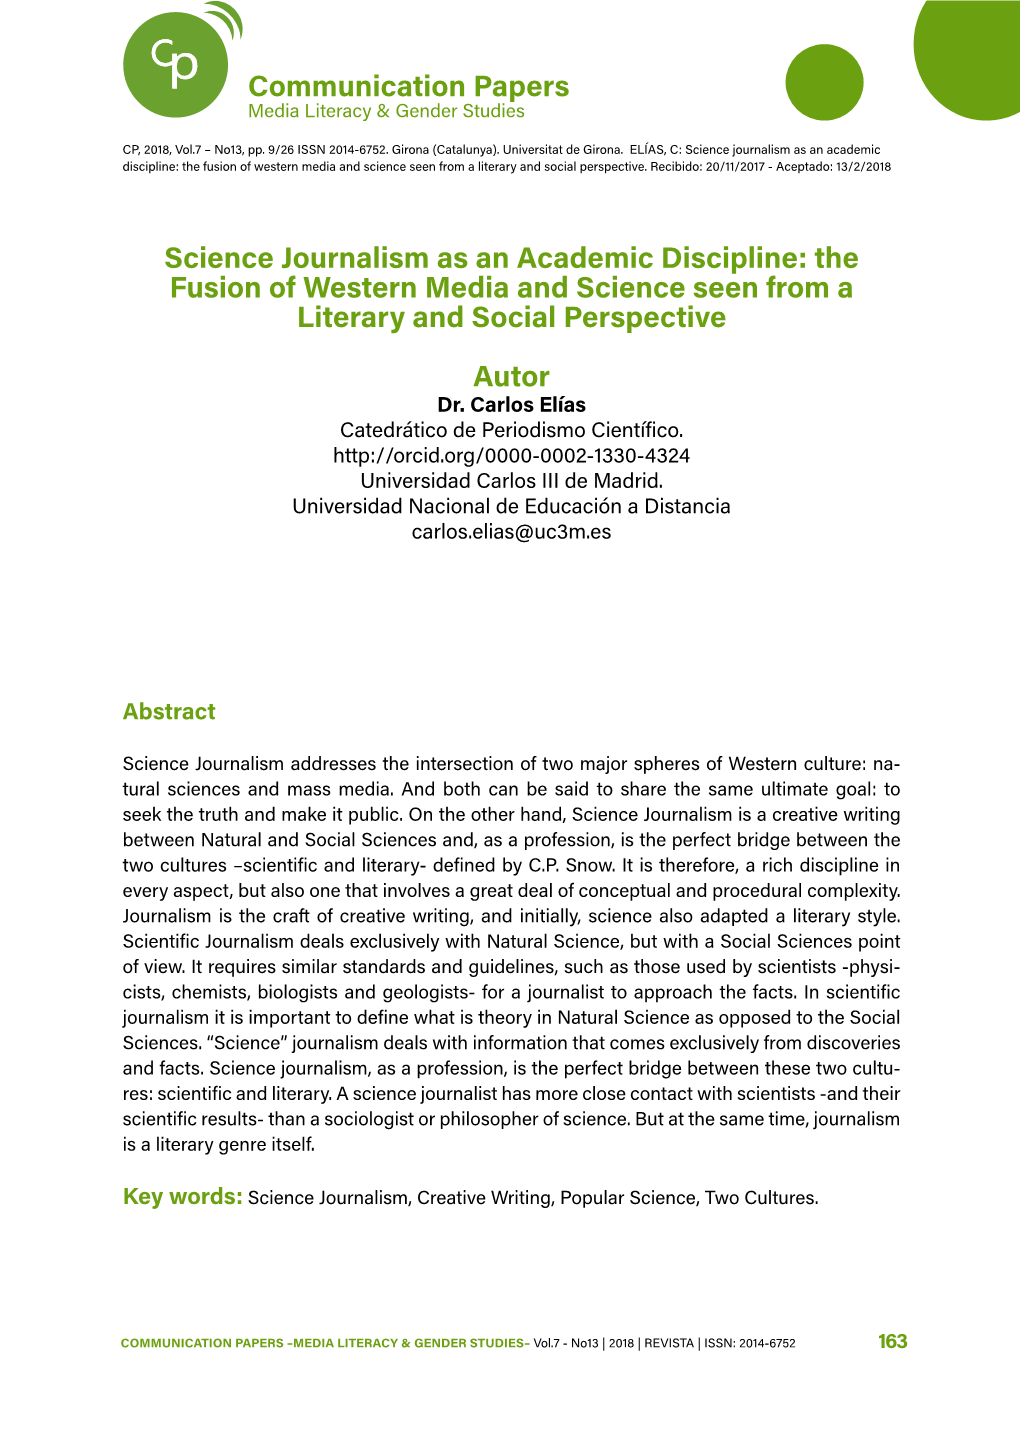 Science Journalism As an Academic Discipline: the Fusion of Western Media and Science Seen from a Literary and Social Perspective